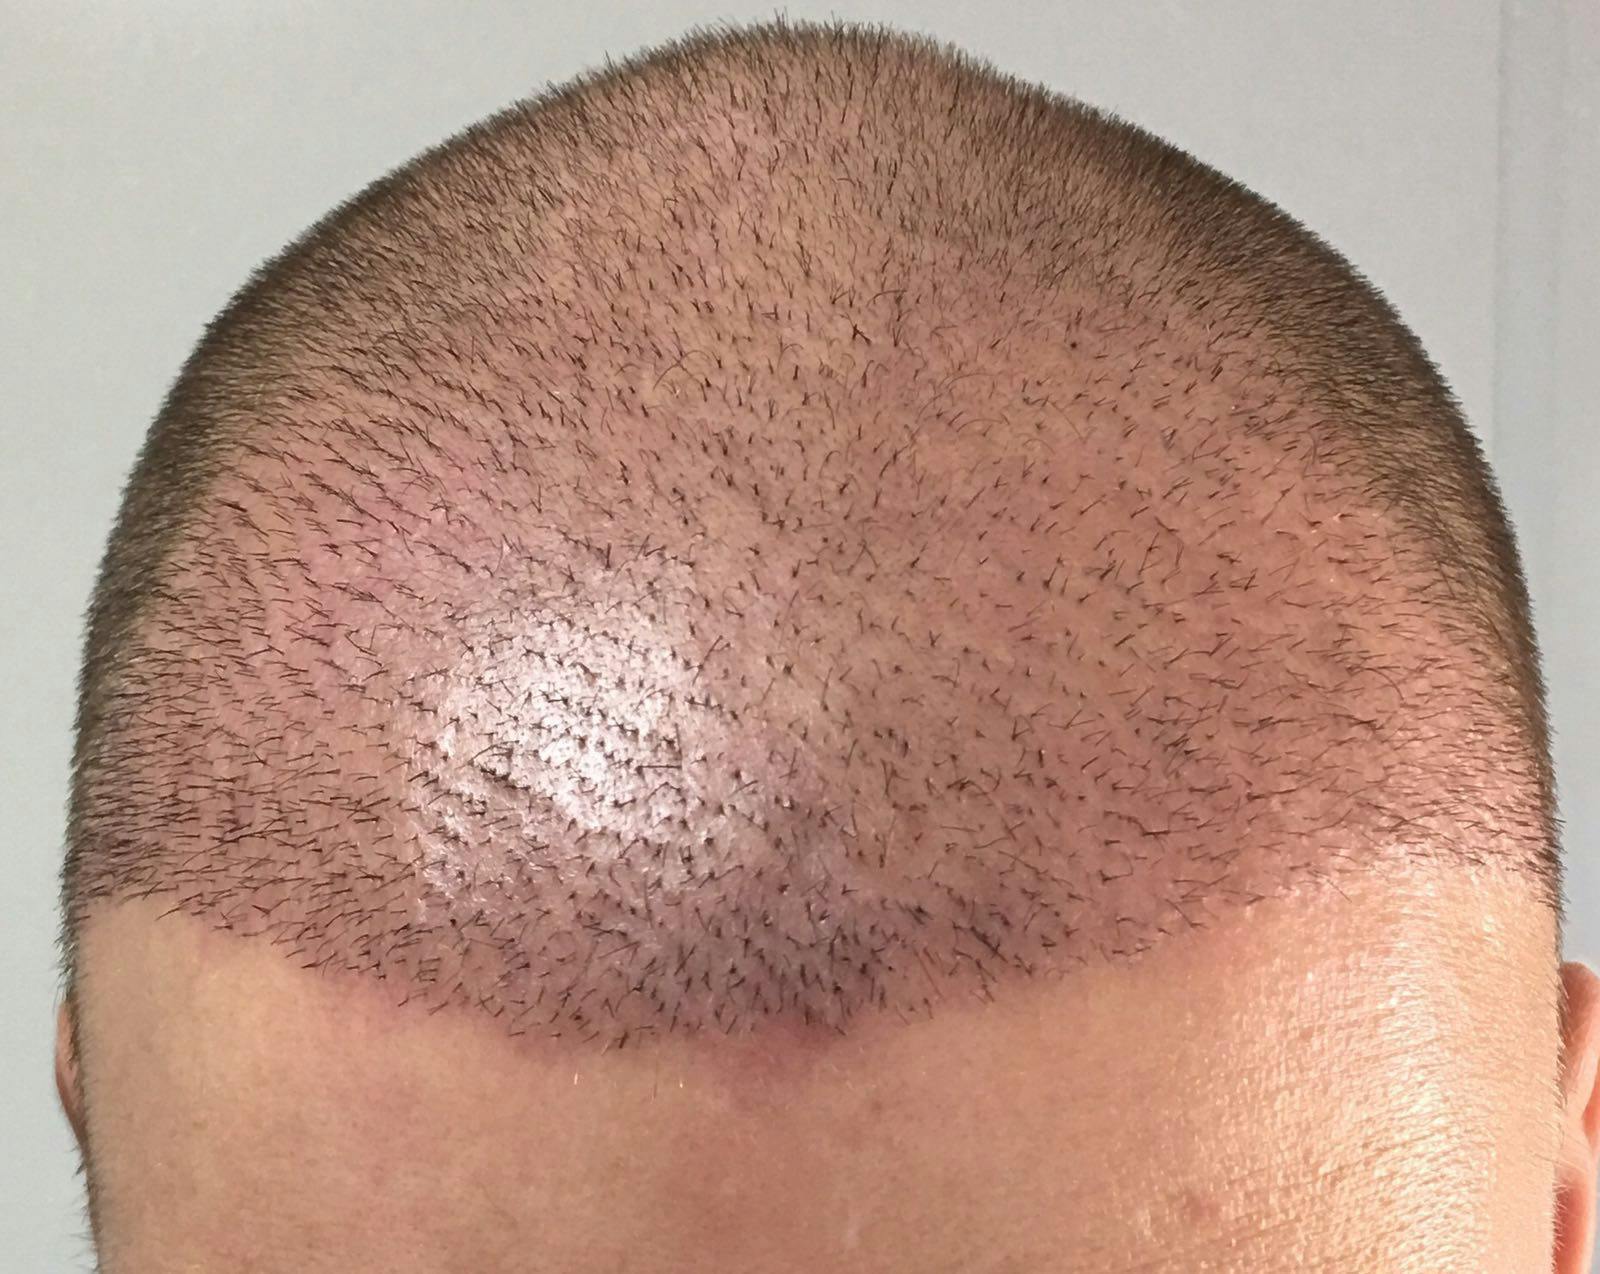 Image2_Patient Stories: Charles’s Hair Transplant - 5 Months Later